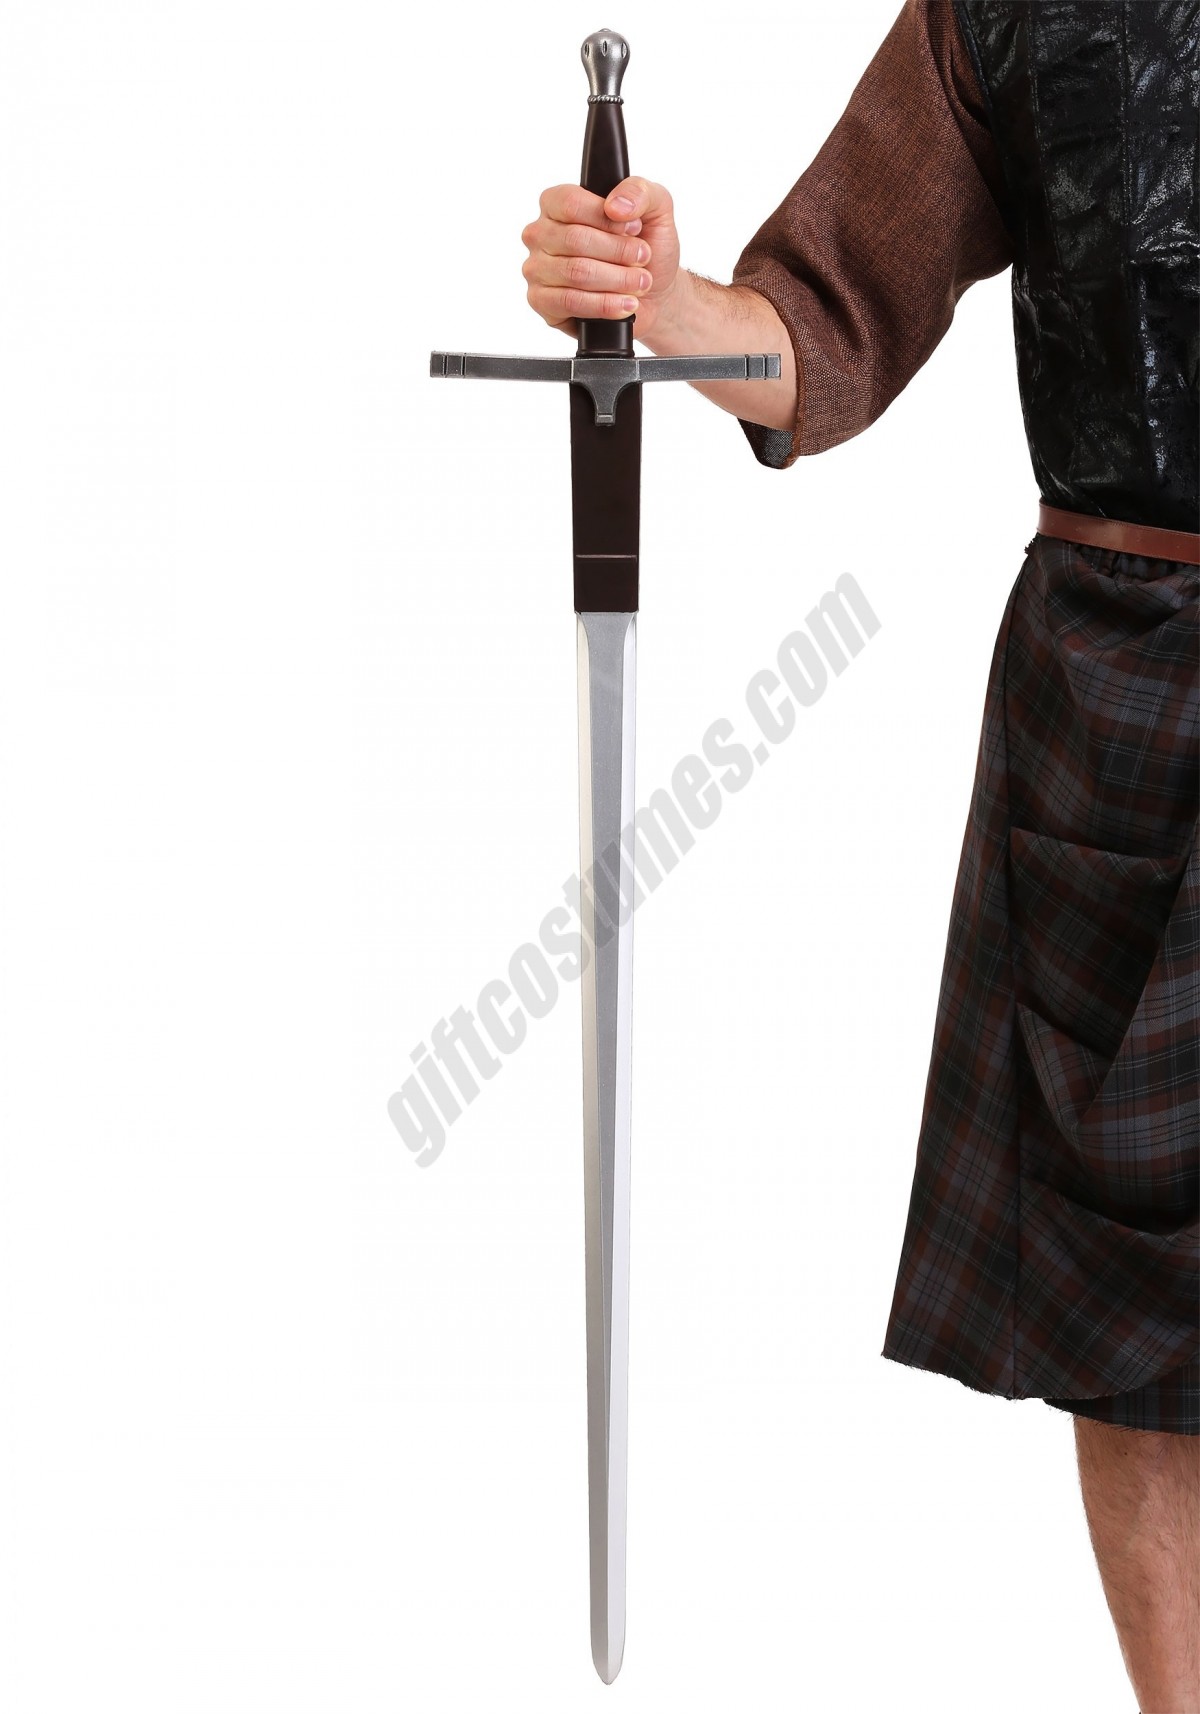 William Wallace Sword from Braveheart Promotions - -1